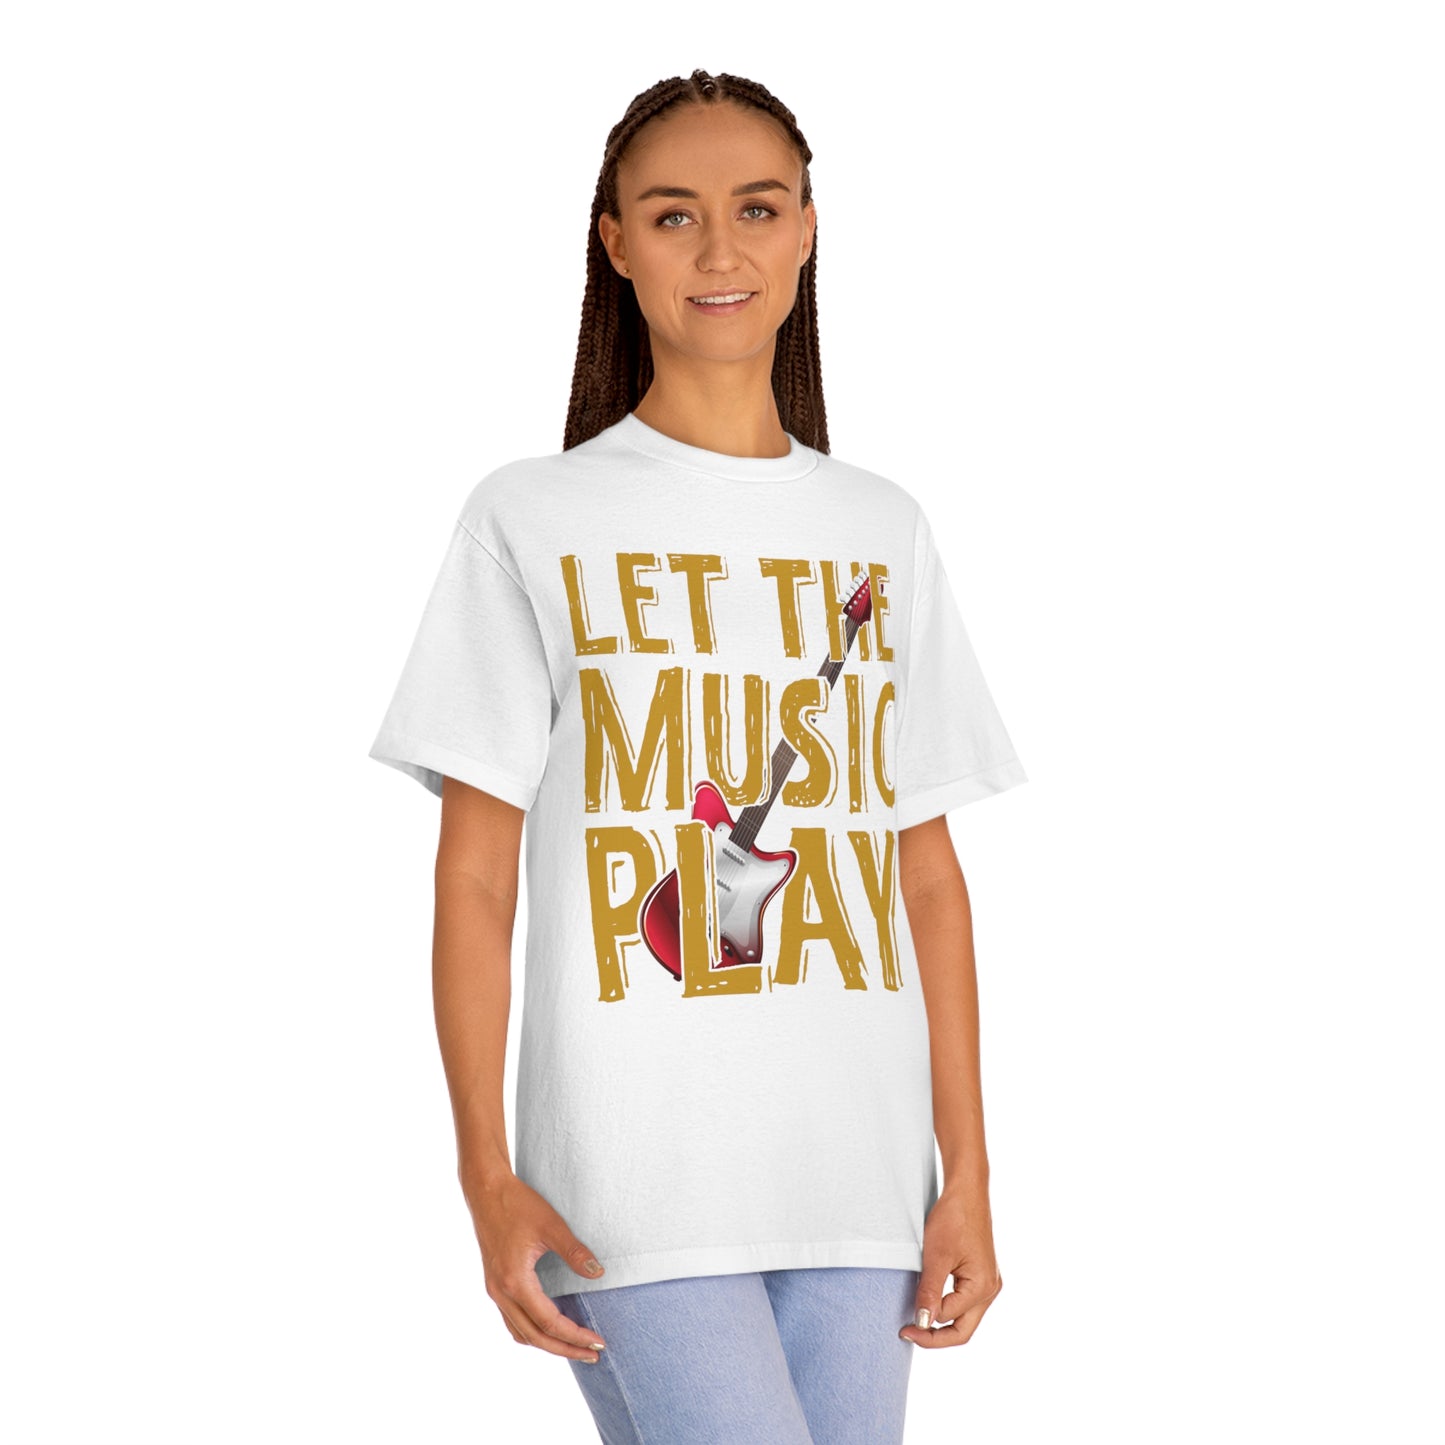 Let the music play Unisex Classic Tee